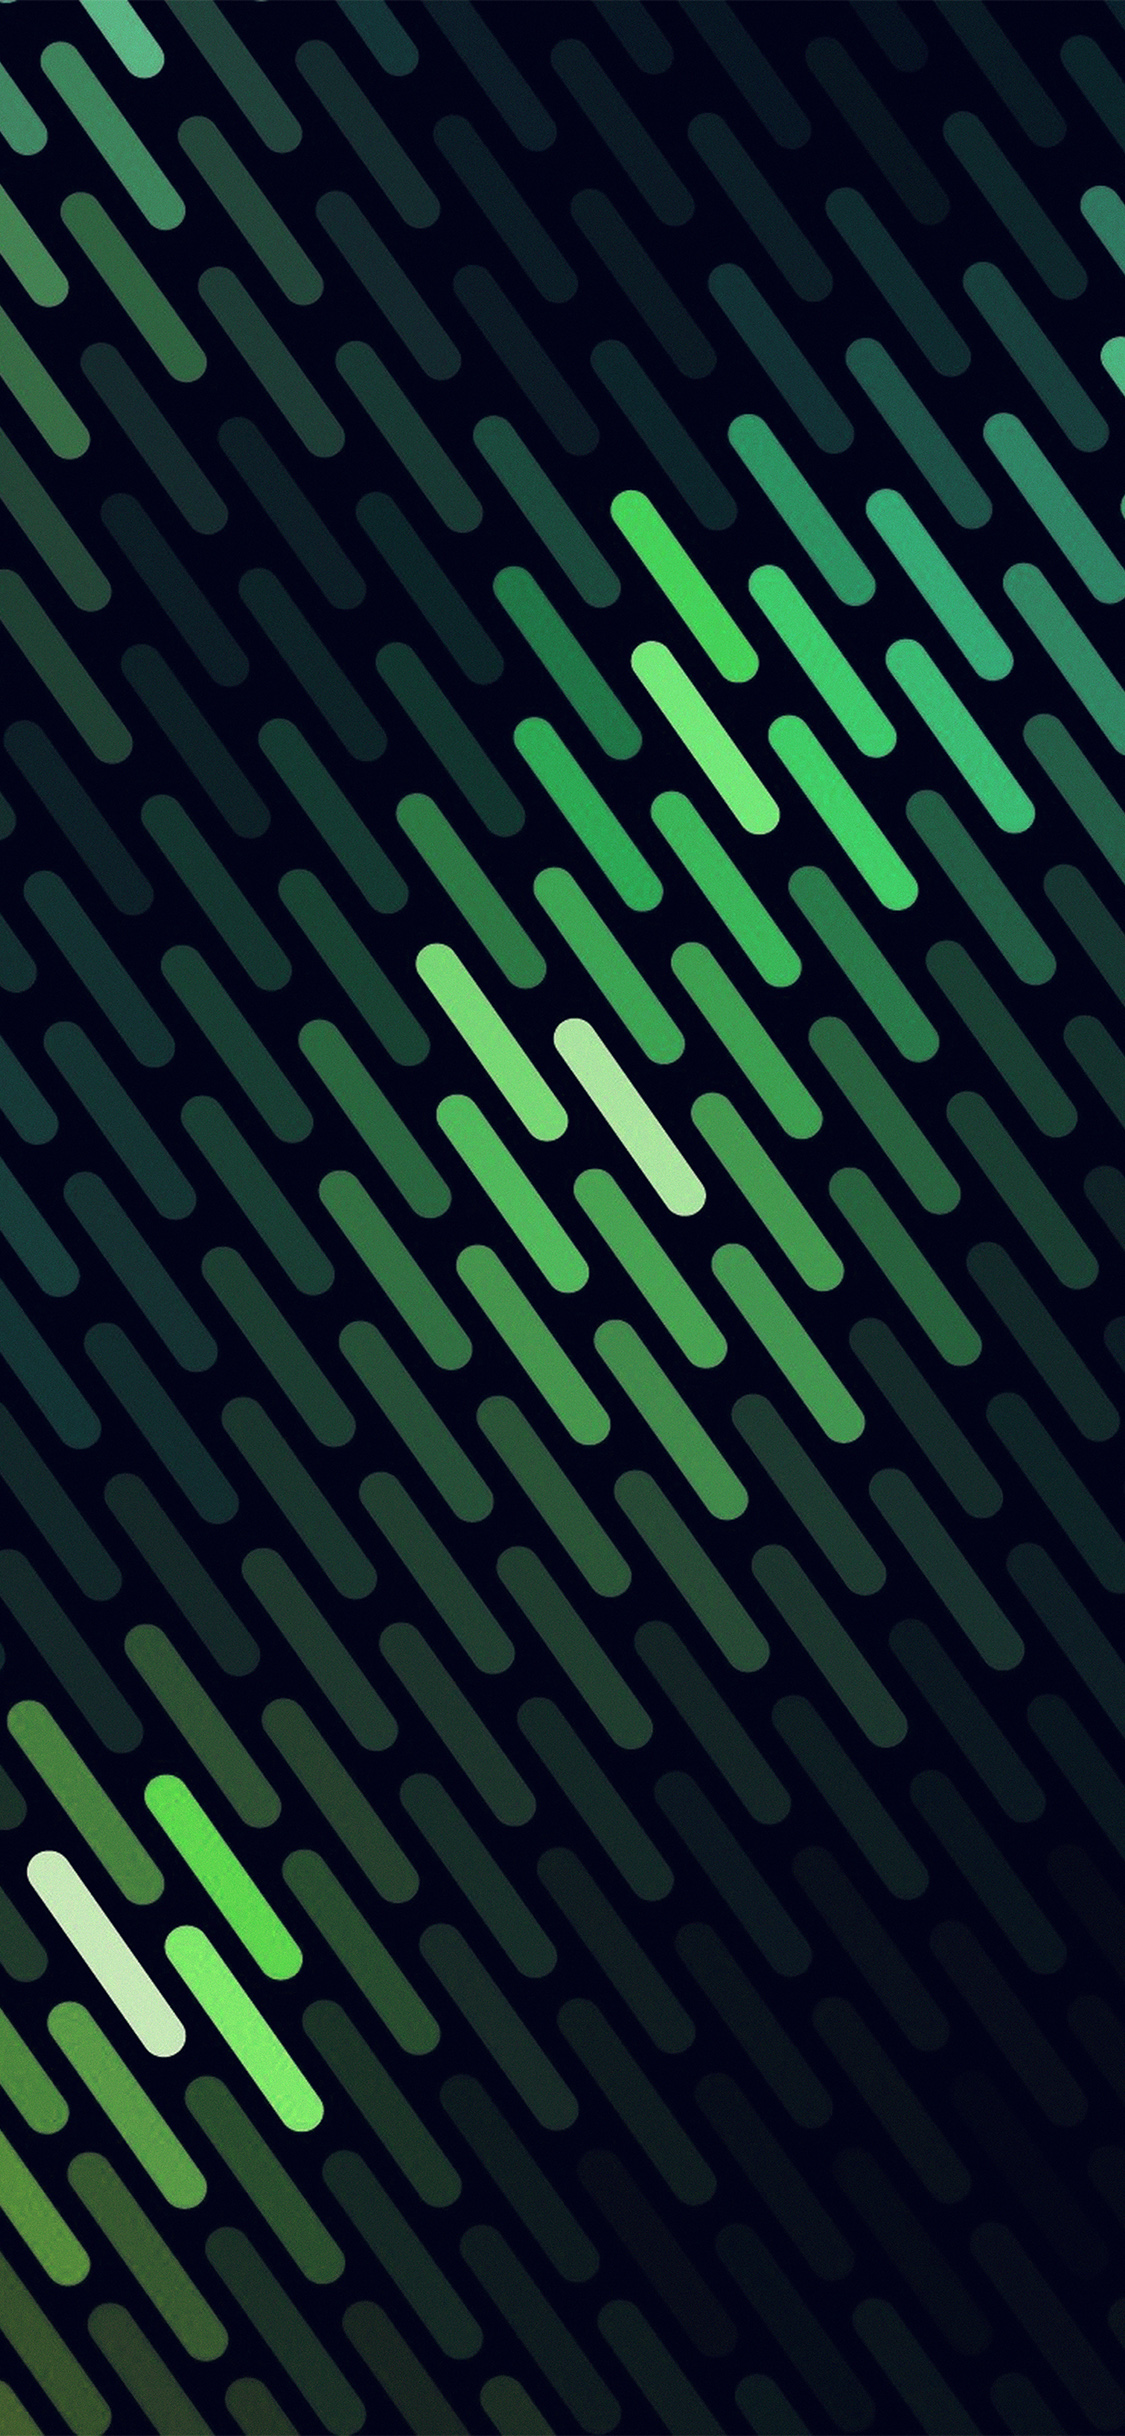 iPhone X wallpaper. abstract green dots lines pattern